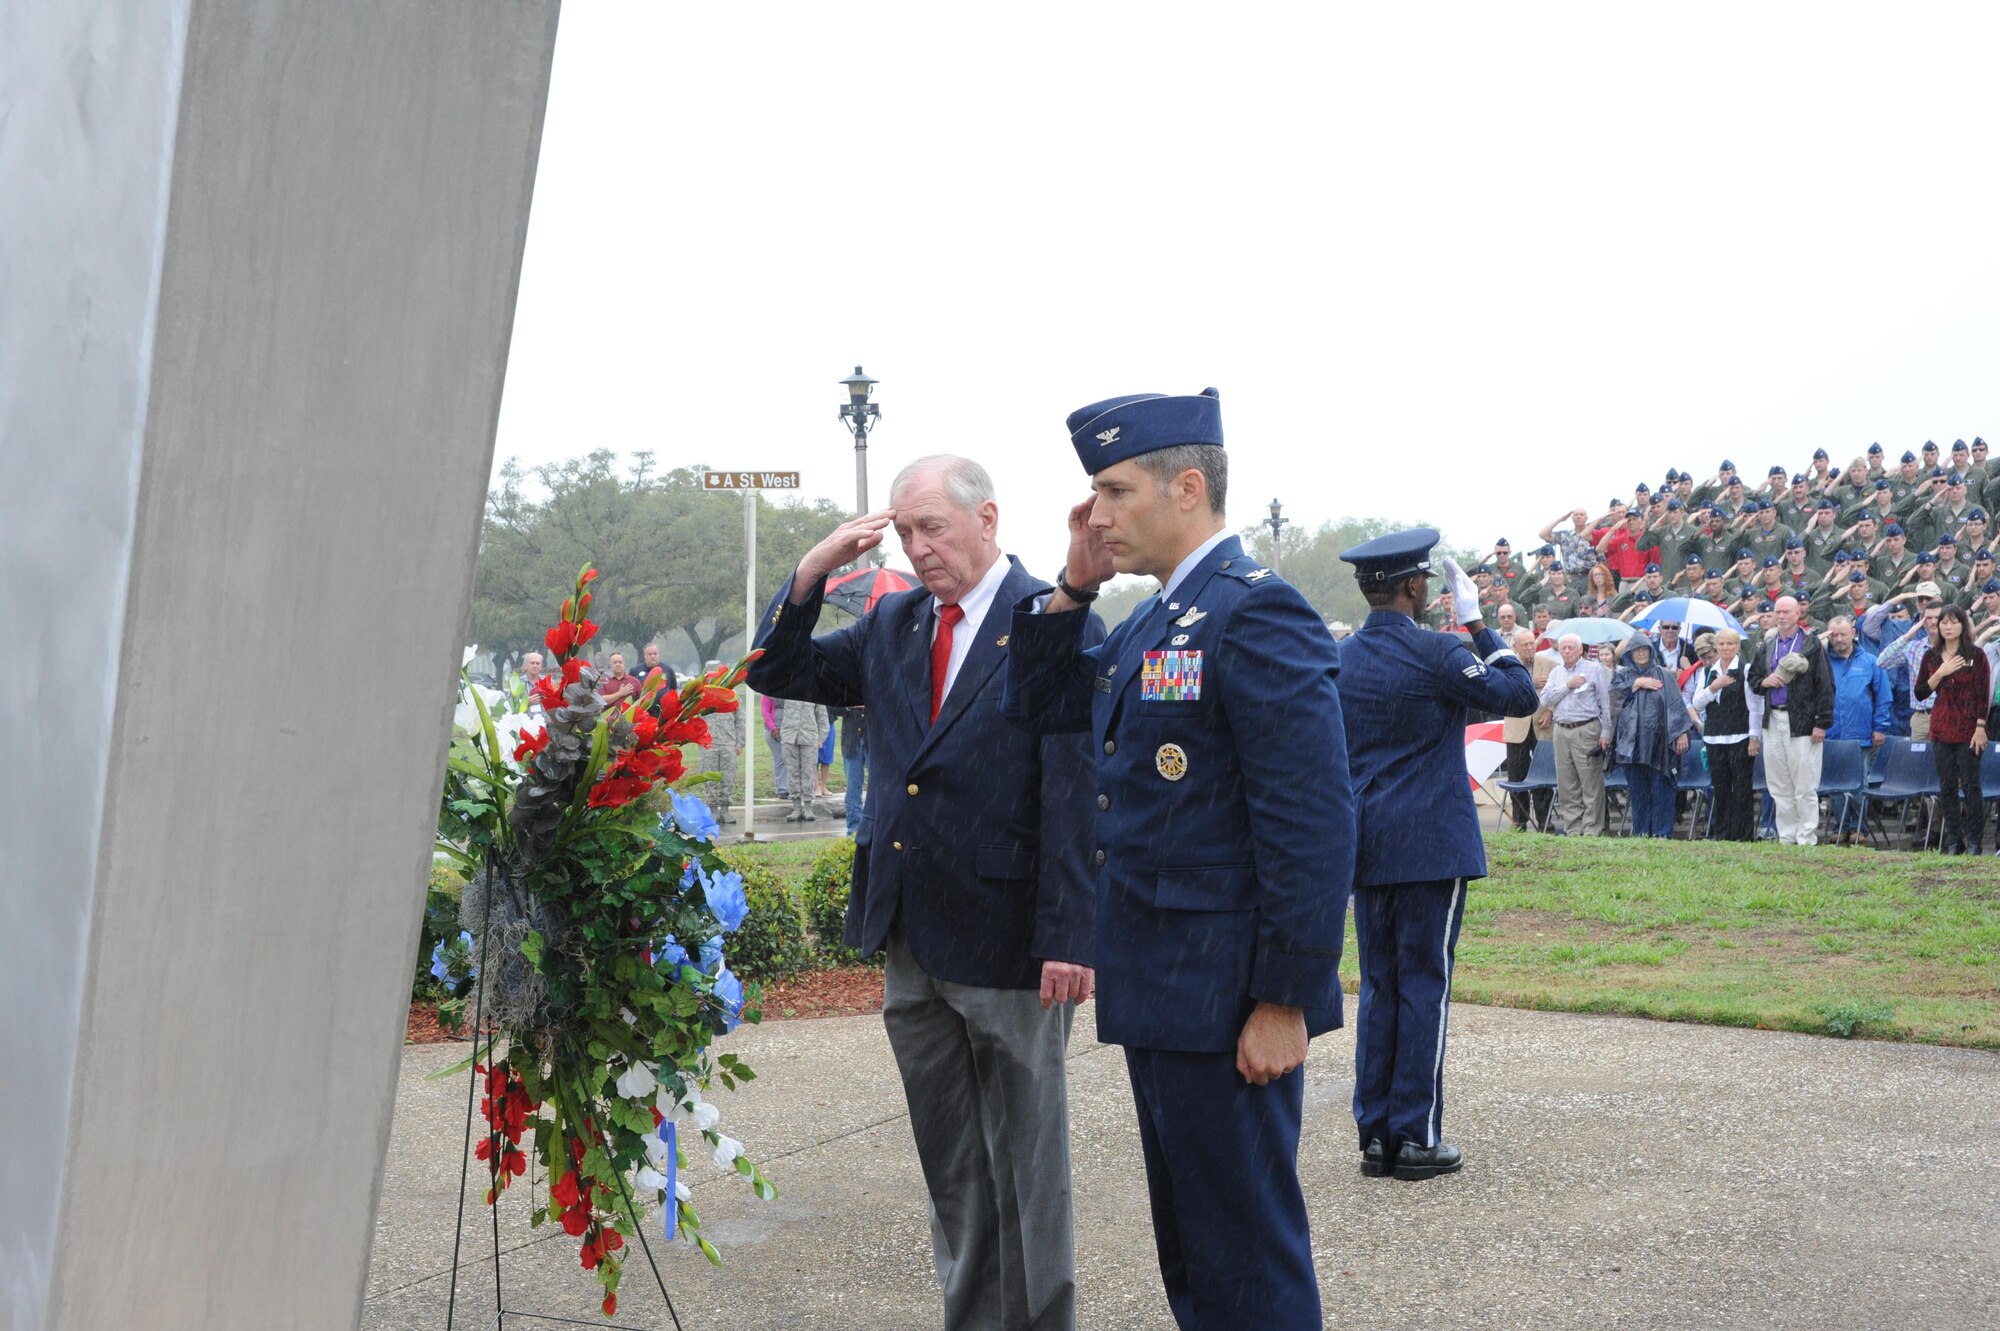 Col. Matthew Isler, 12th Flying Training Wing commander, (right) and retired Marine Lt. Col. Orson Swindle (left), whose F-8E aircraft was shot down over North Vietnam Nov. 11, 1966, salute the wreath at the Joint Base San Antonio-Randolph Missing Man Monument during a wreath laying ceremony March 20 to honor prisoners of war and those missing in action. (U.S. Air Photo by Melissa Peterson)